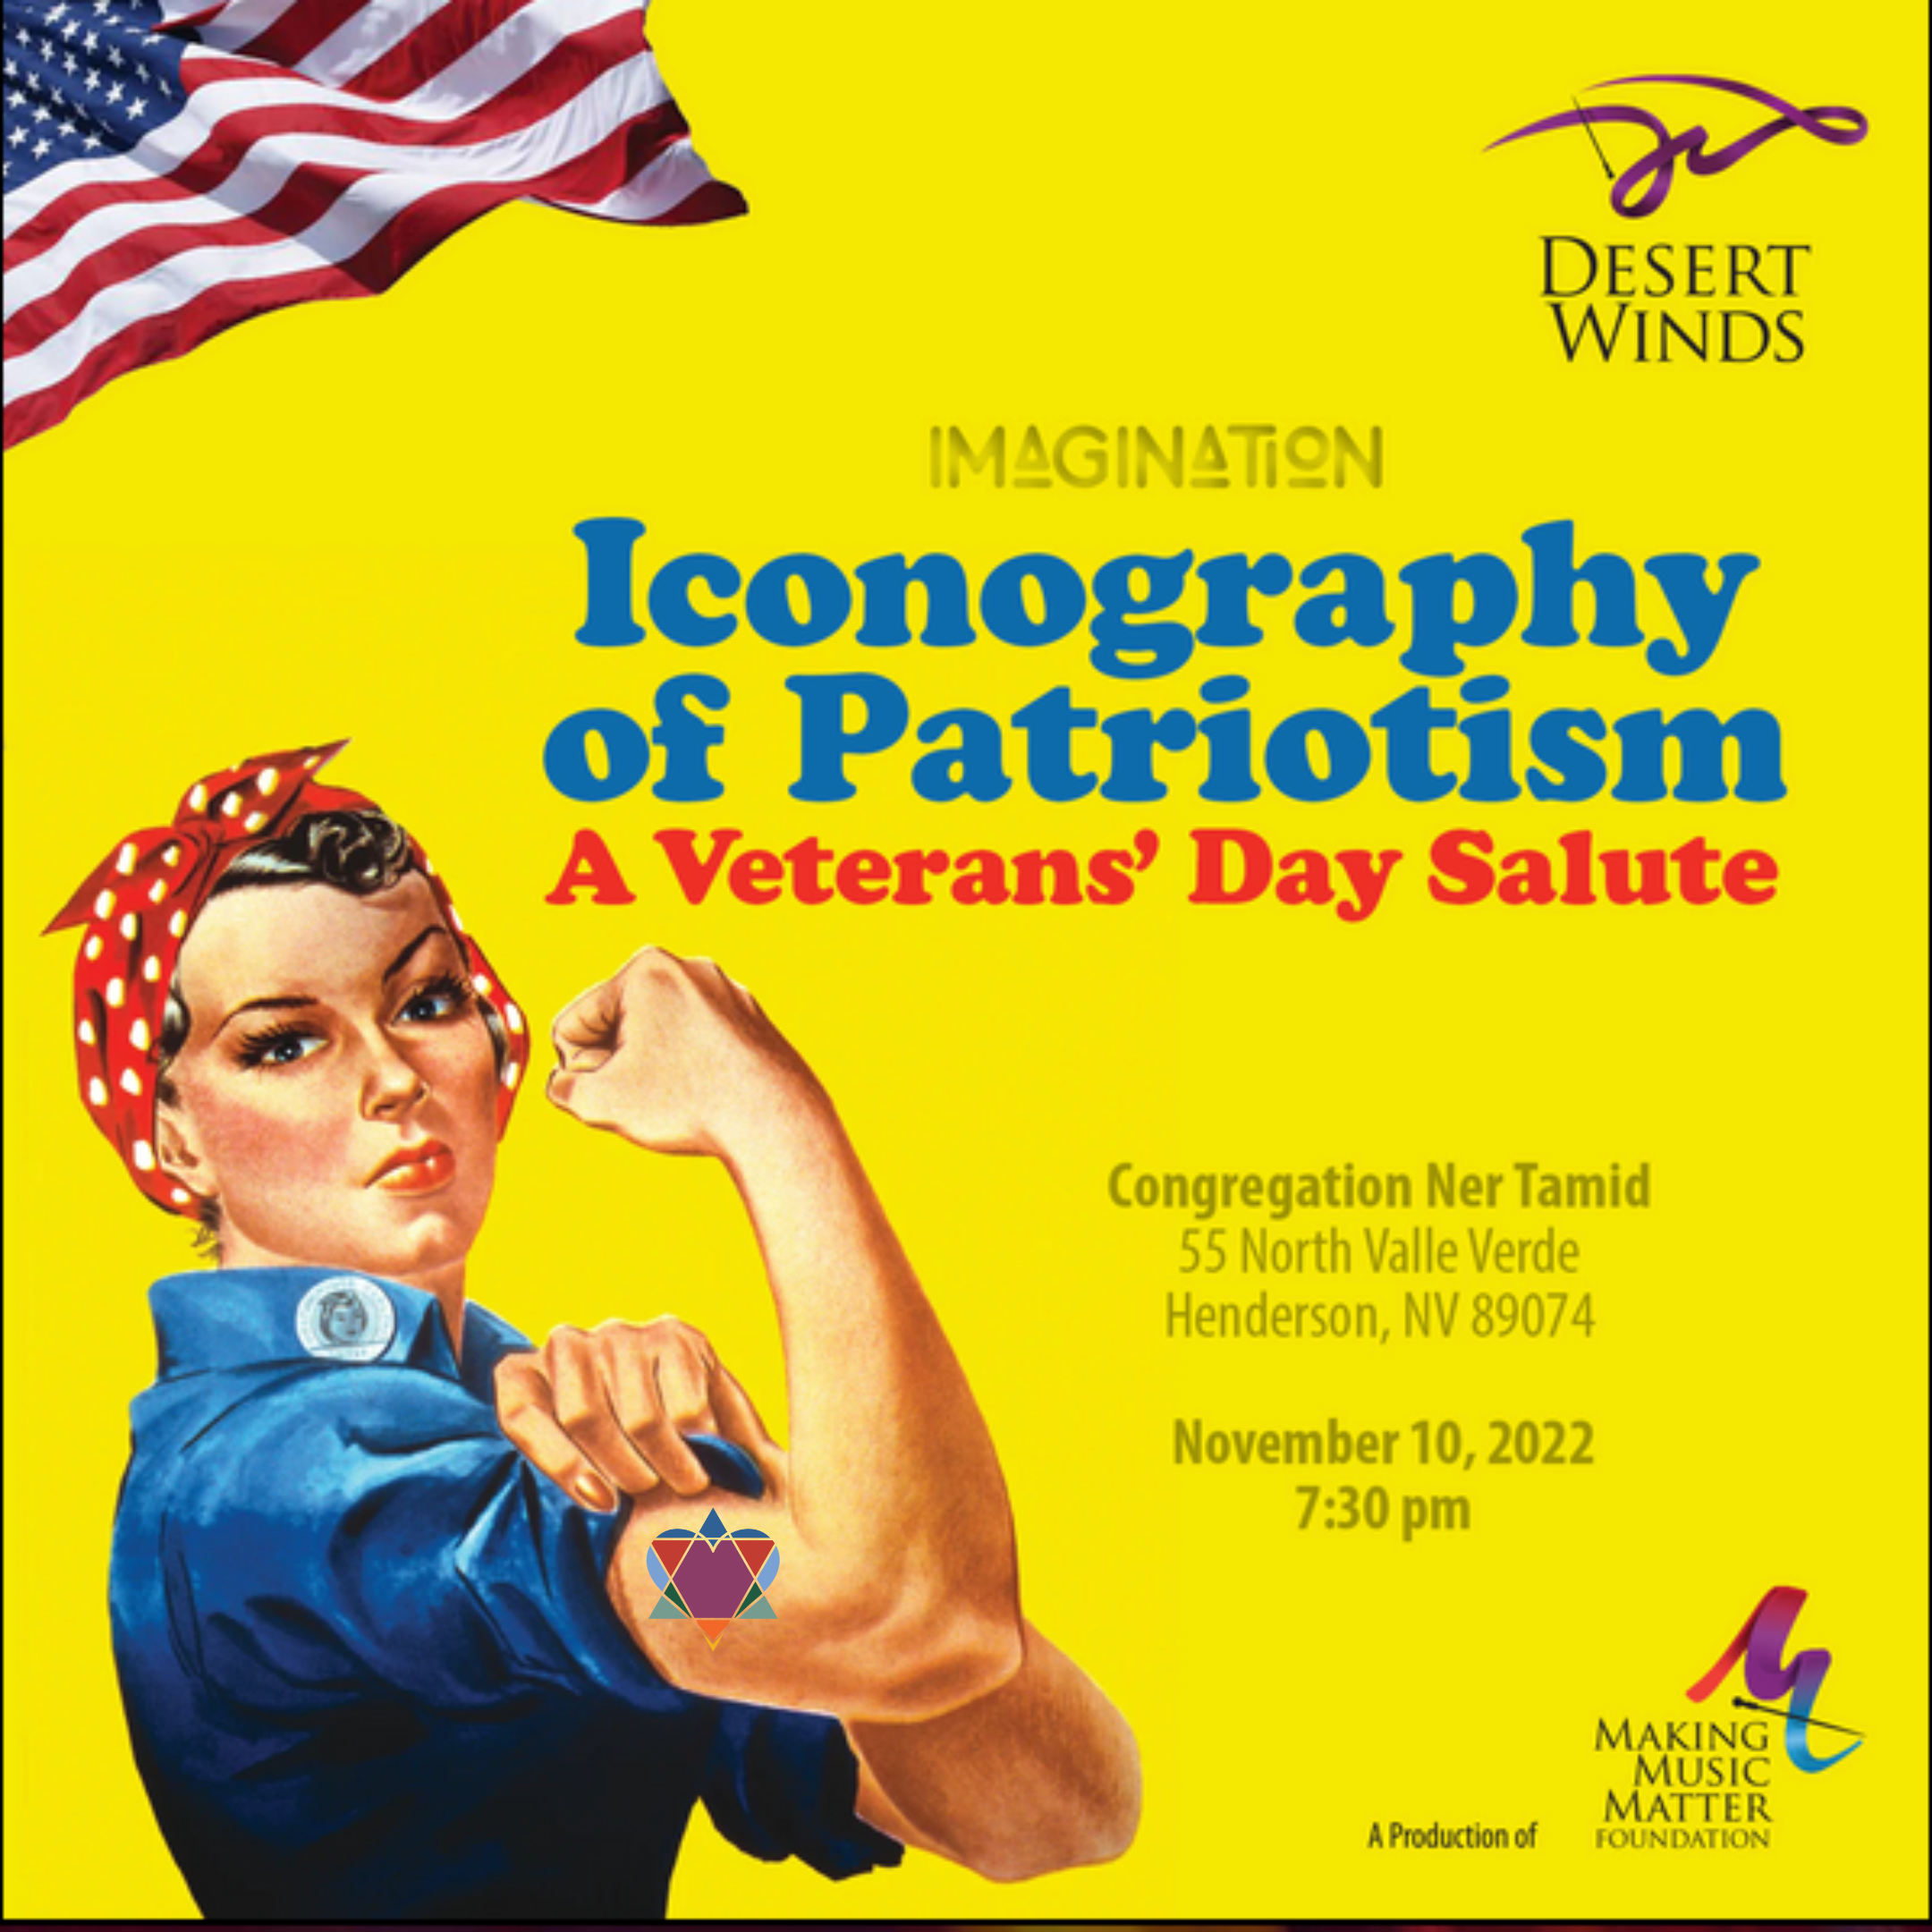 THE DESERT WINDS - ICONOGRAPHY OF PATRIOTISM – A VETERANS' DAY SALUTE